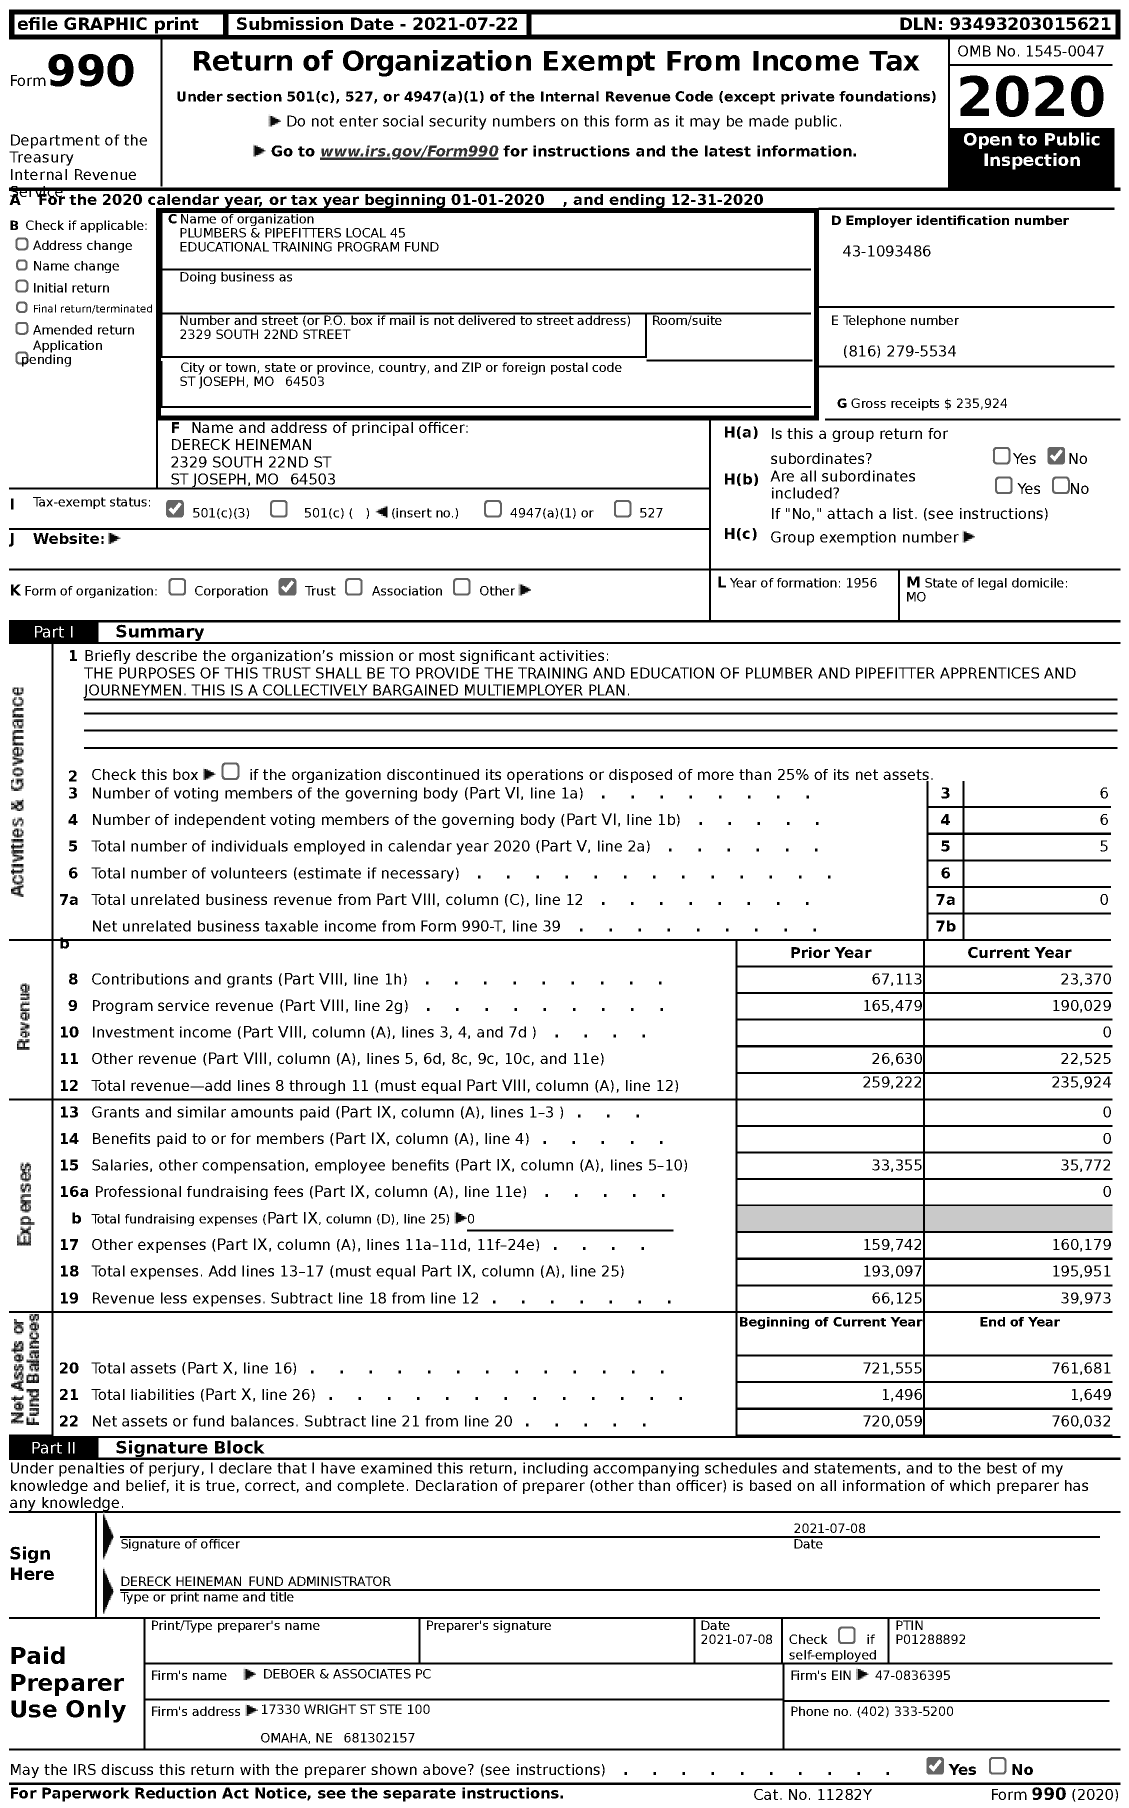 Image of first page of 2020 Form 990 for Plumbers and Pipefitters Local 45 Educational Training Program Fund